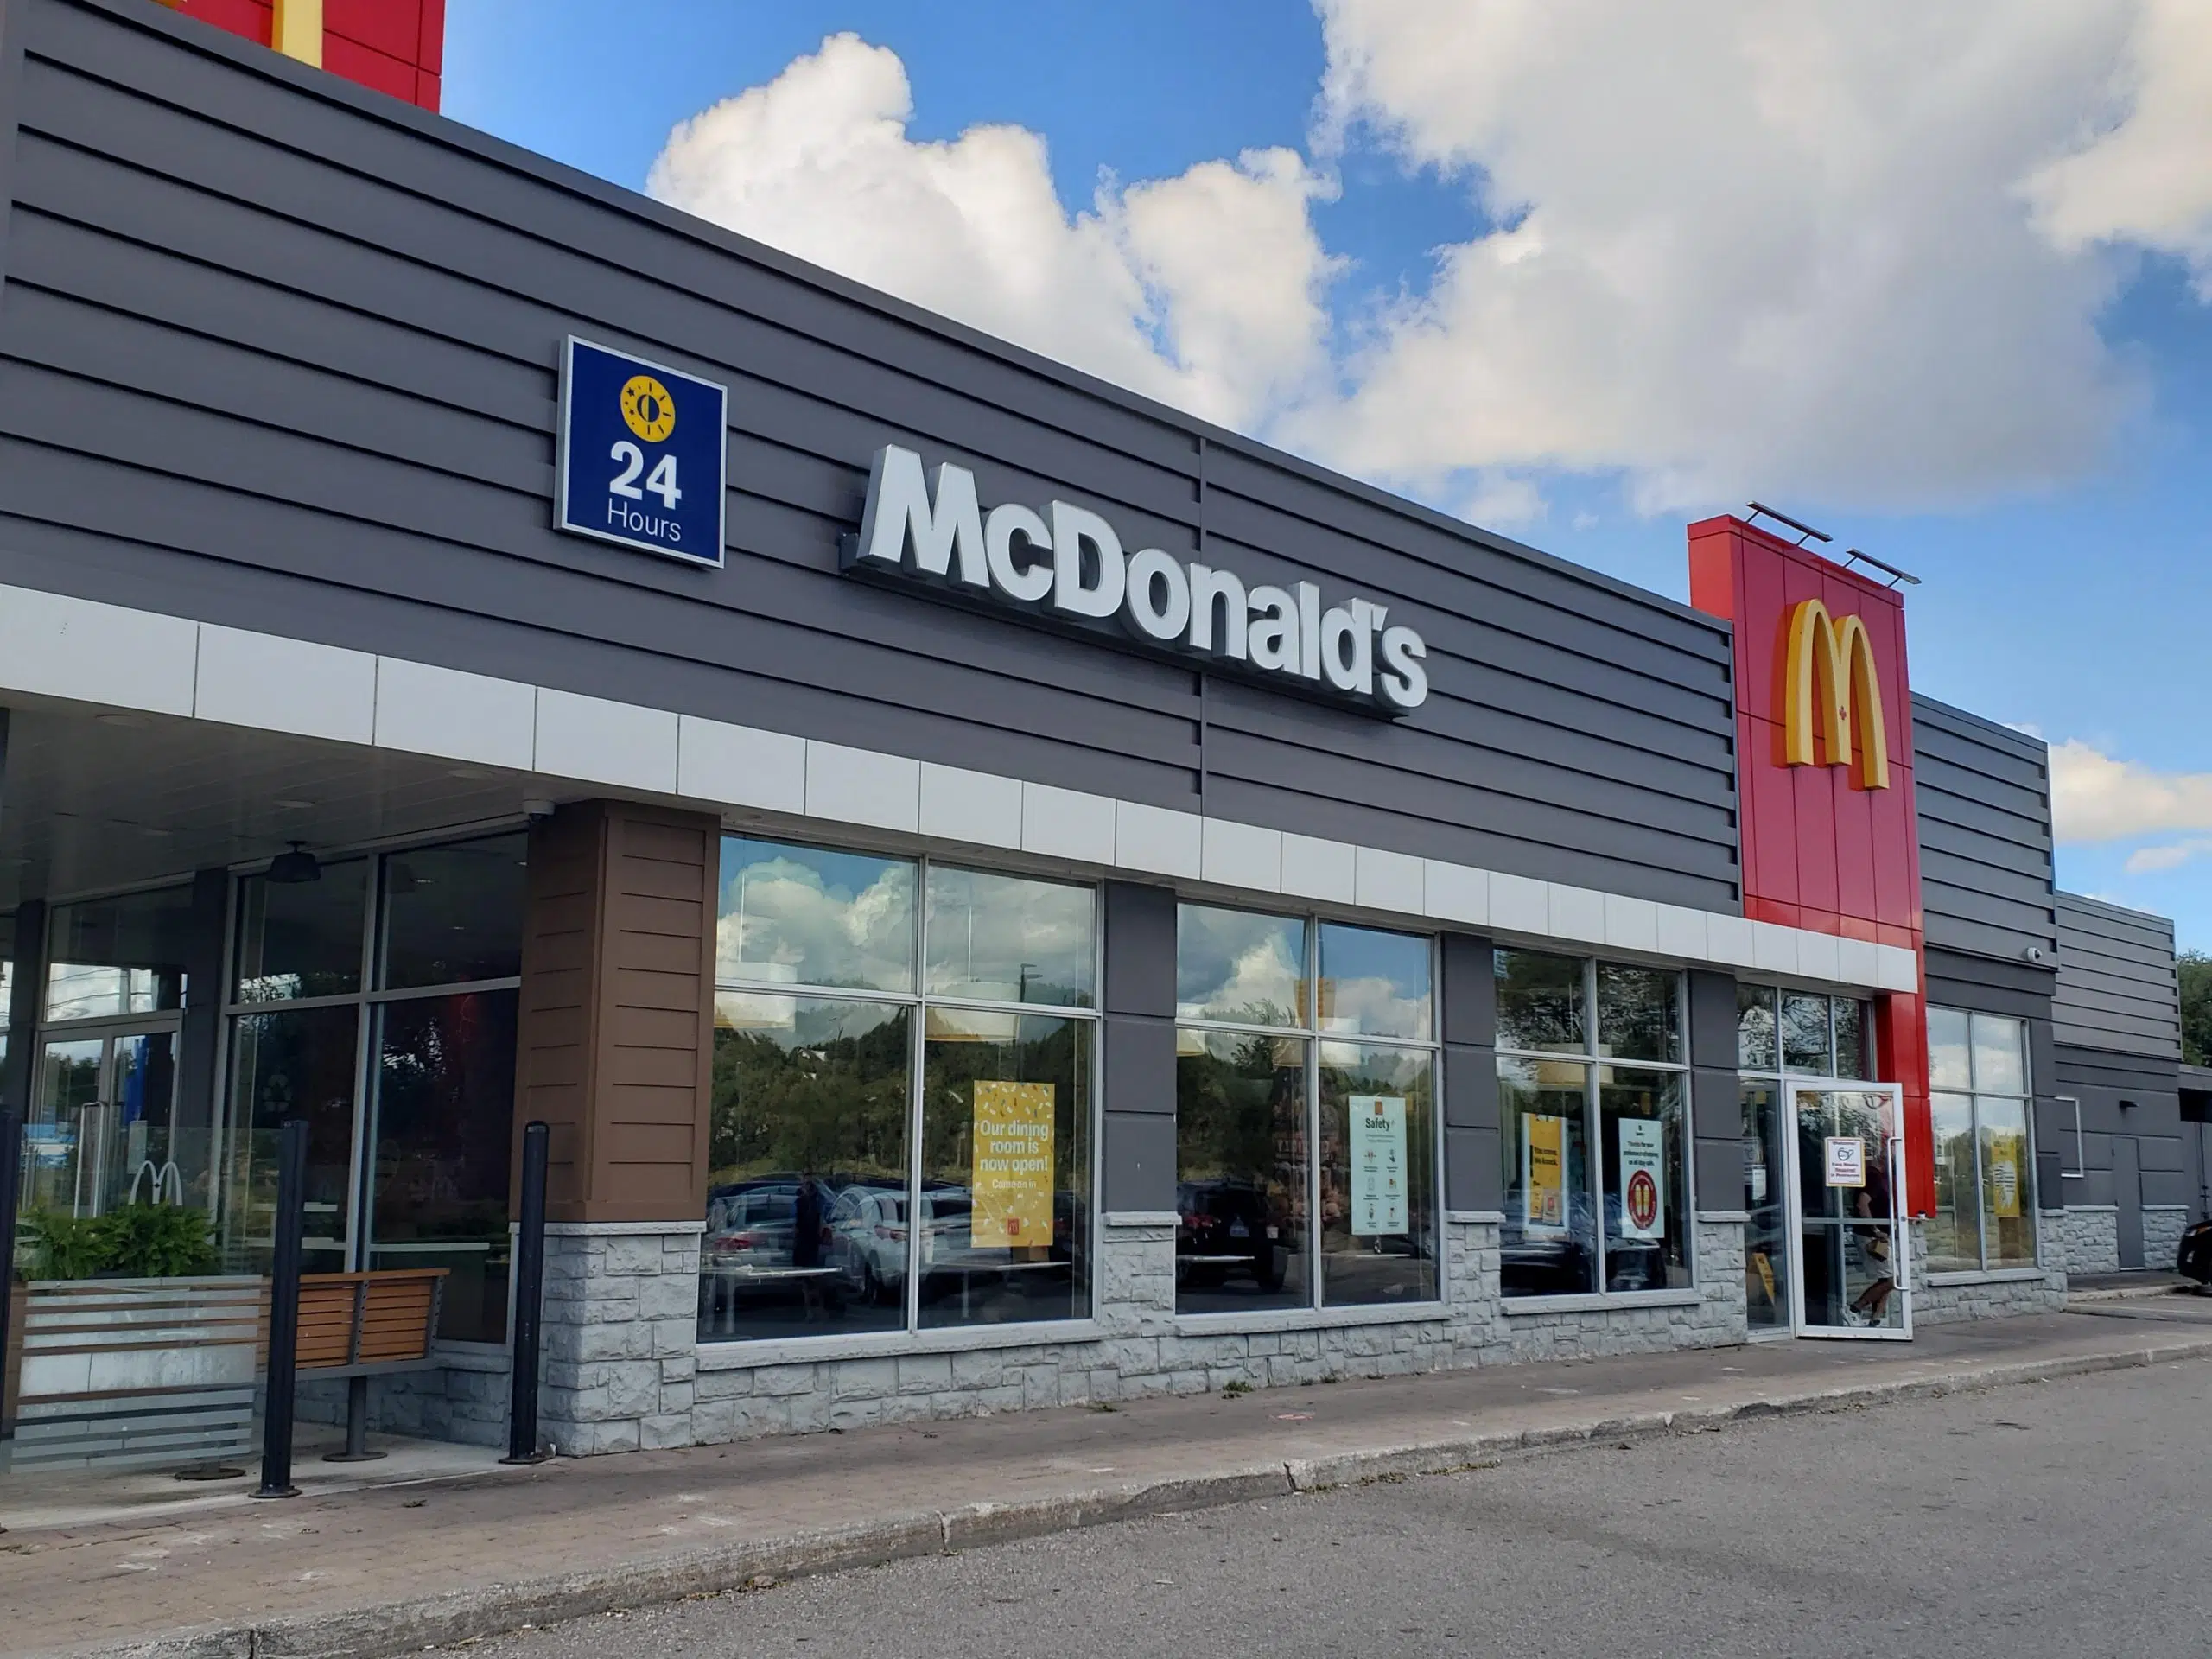 McHappy Day returns this year on September 22nd, in support of Ronald McDonald House Charities